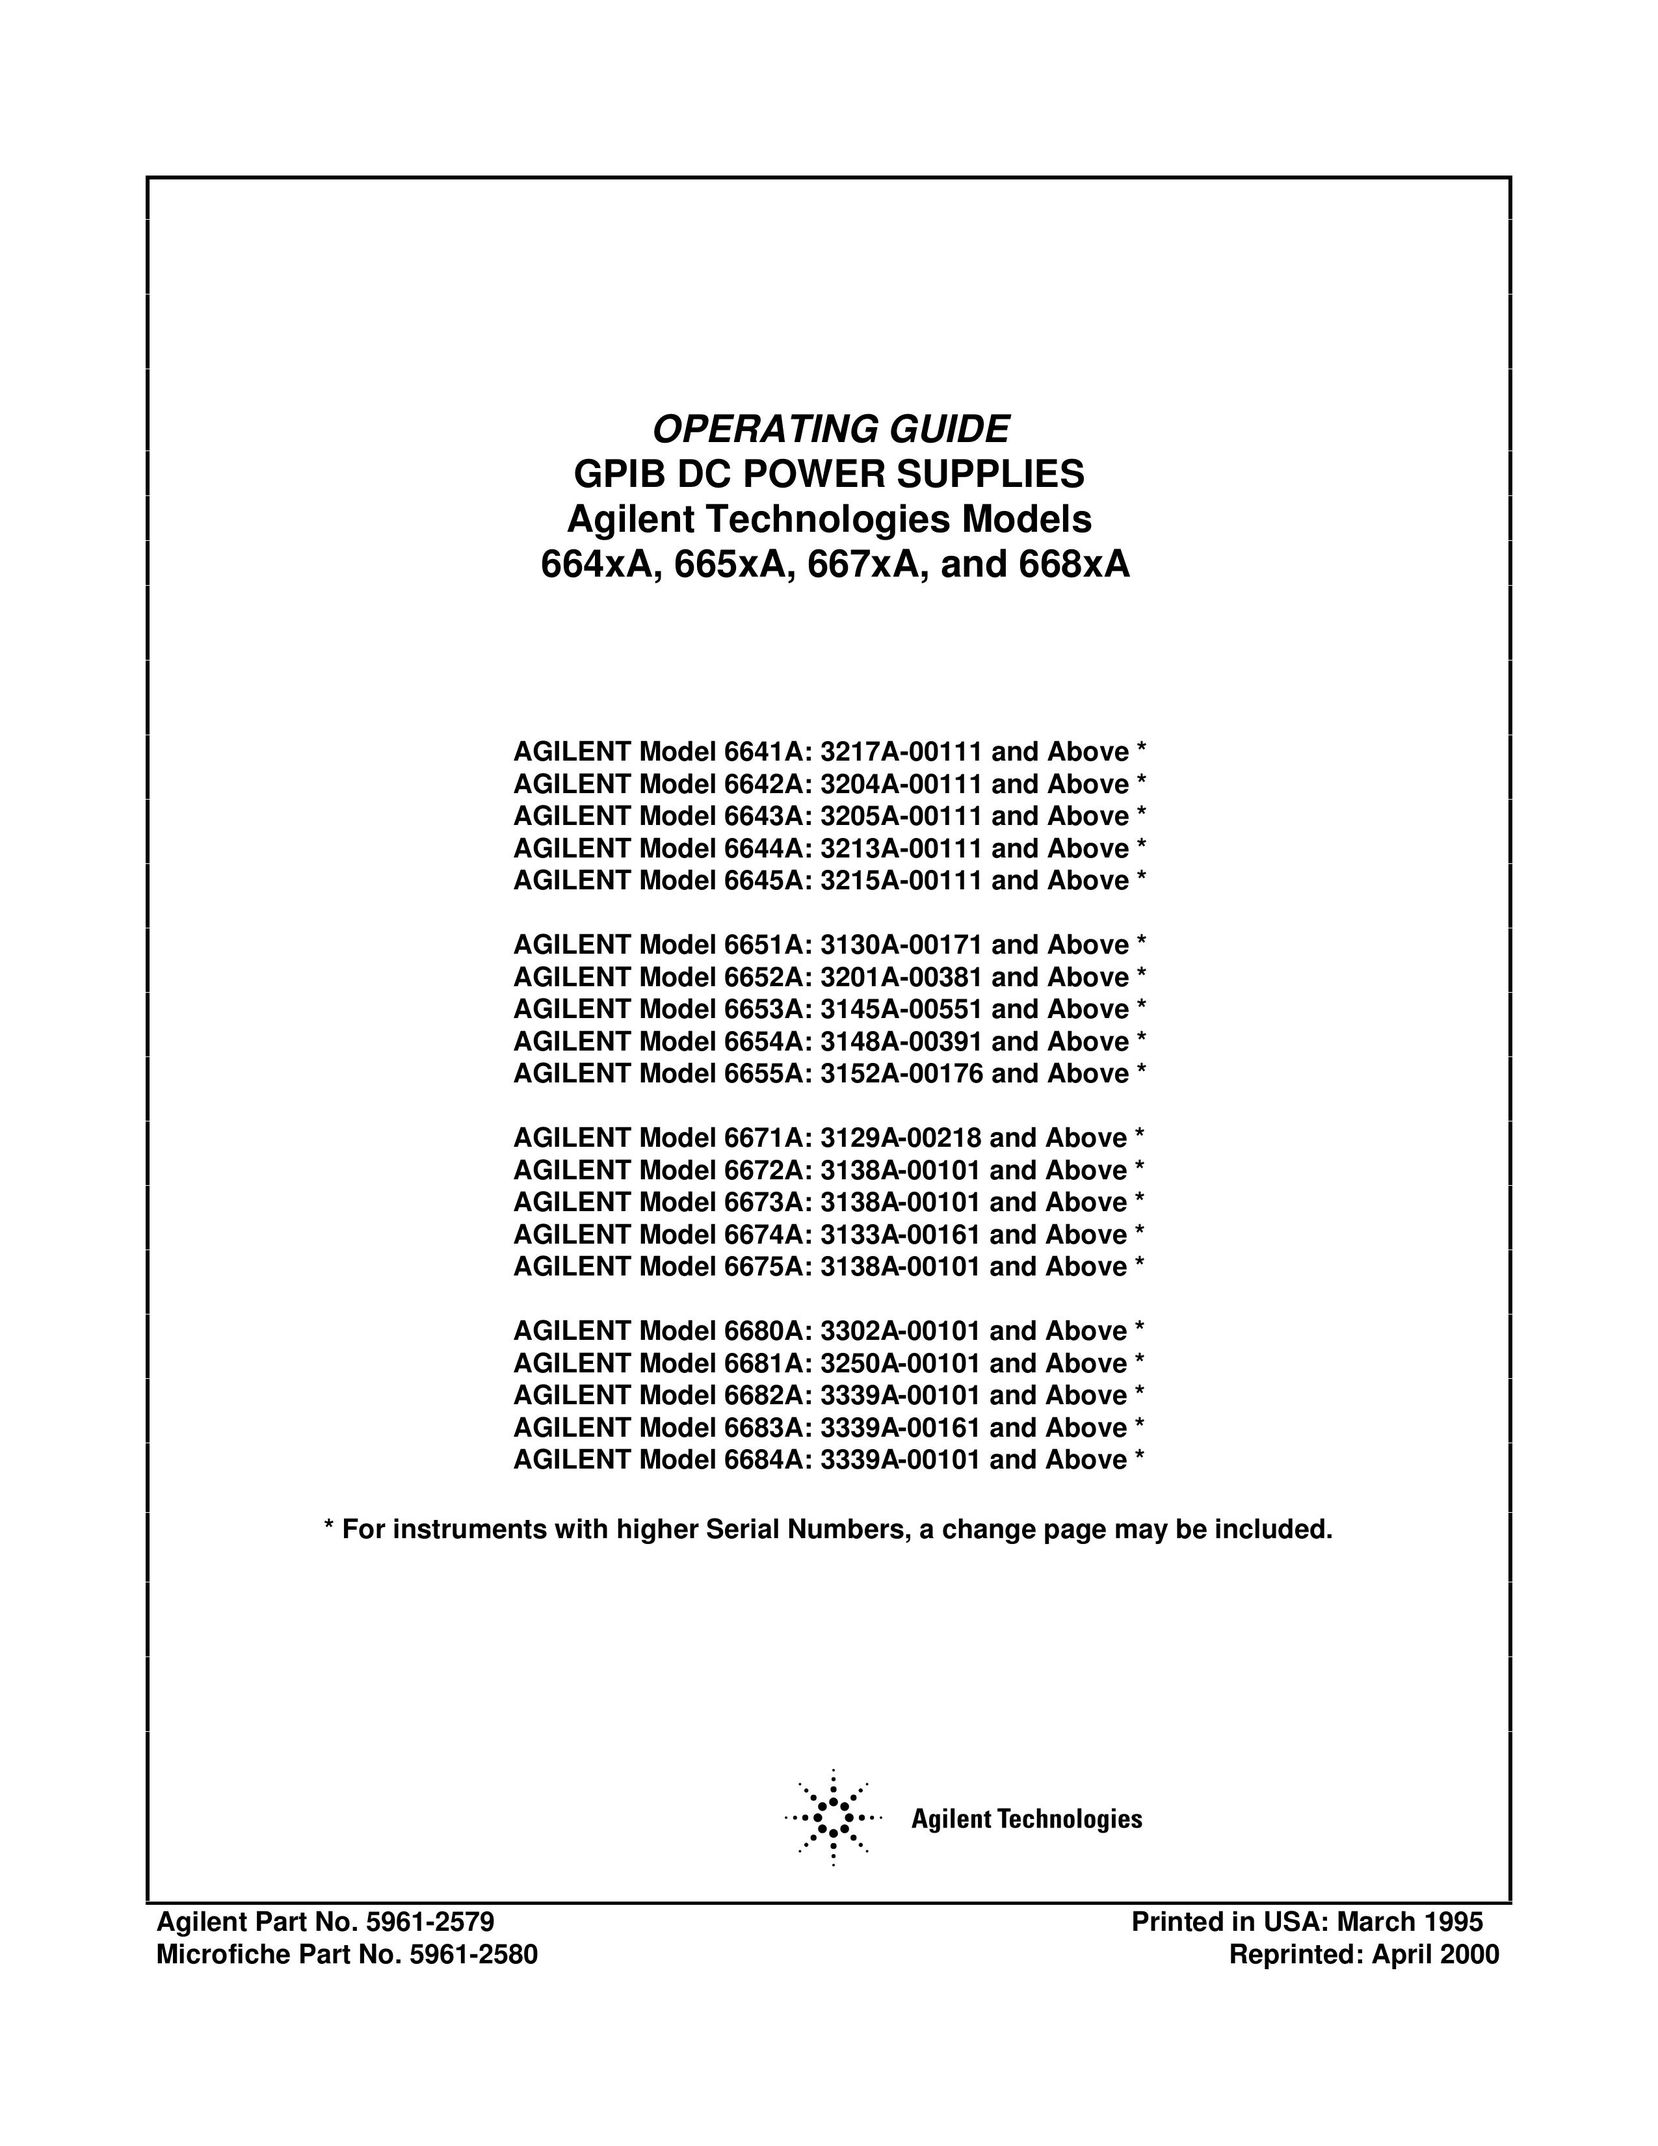 Agilent Technologies Model 6675A: 3138A-00101 Video Gaming Accessories User Manual (Page 1)